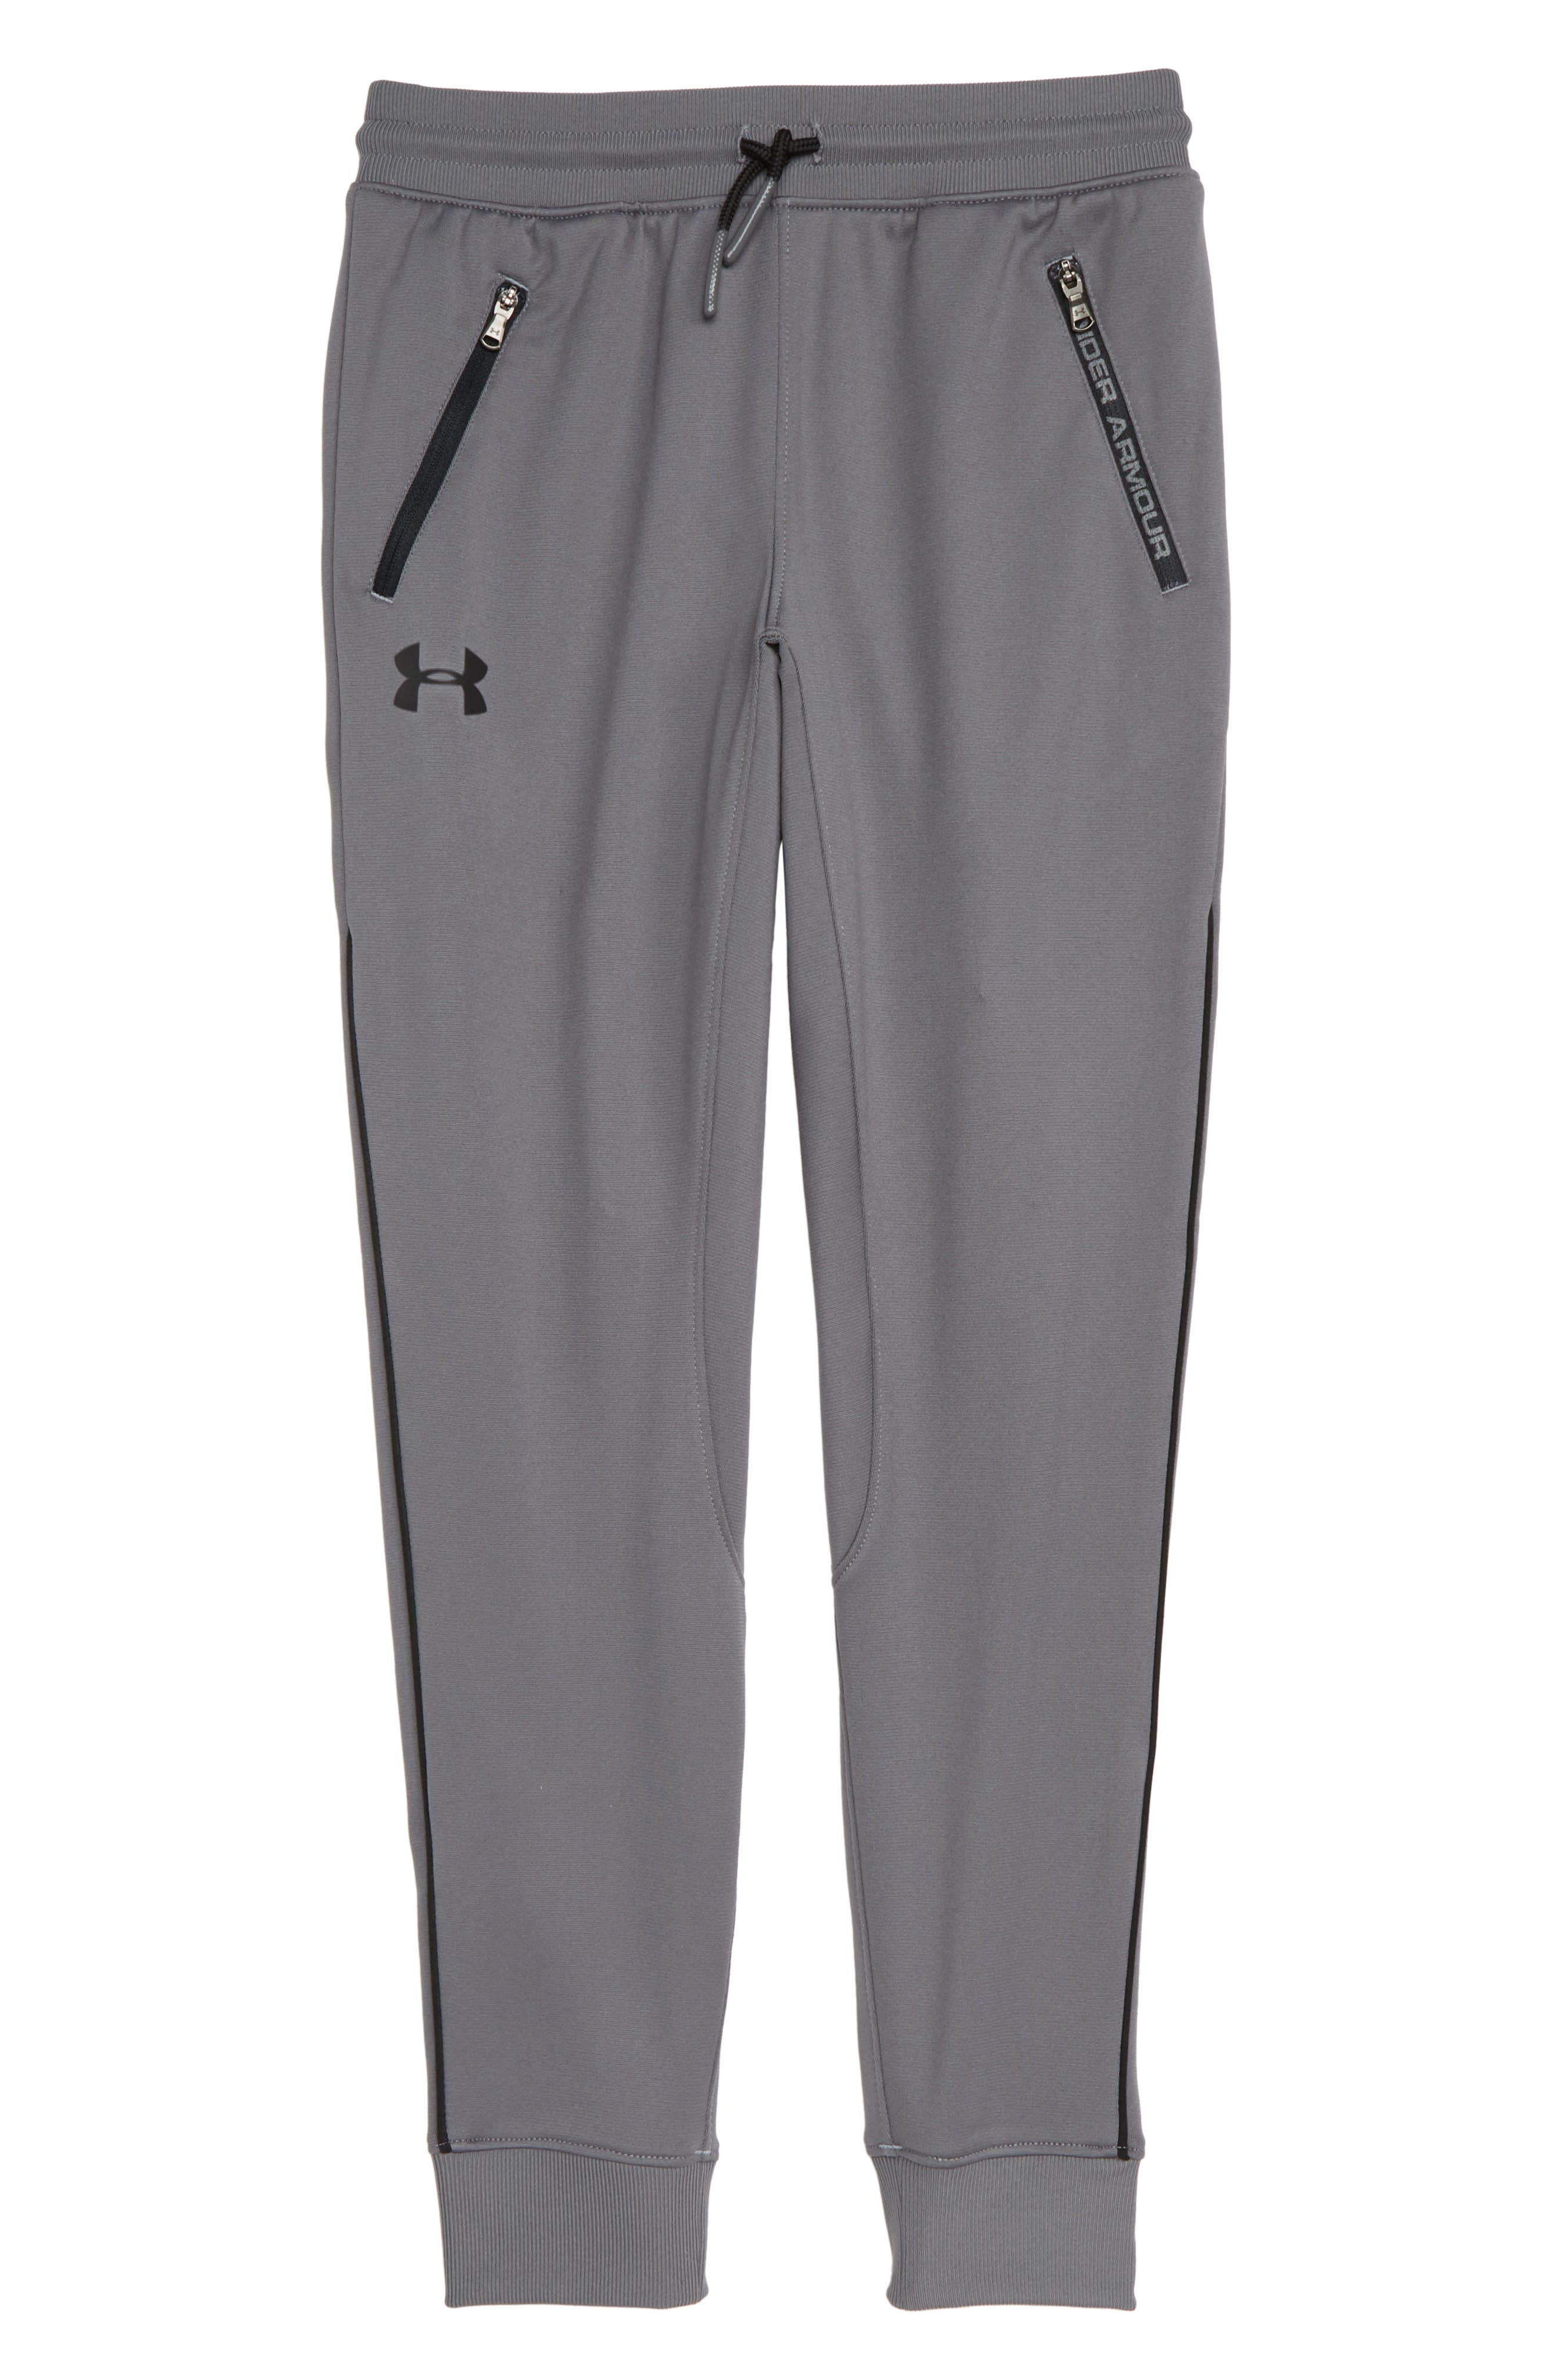 Under Armour Pennant Tapered Sweatpants 